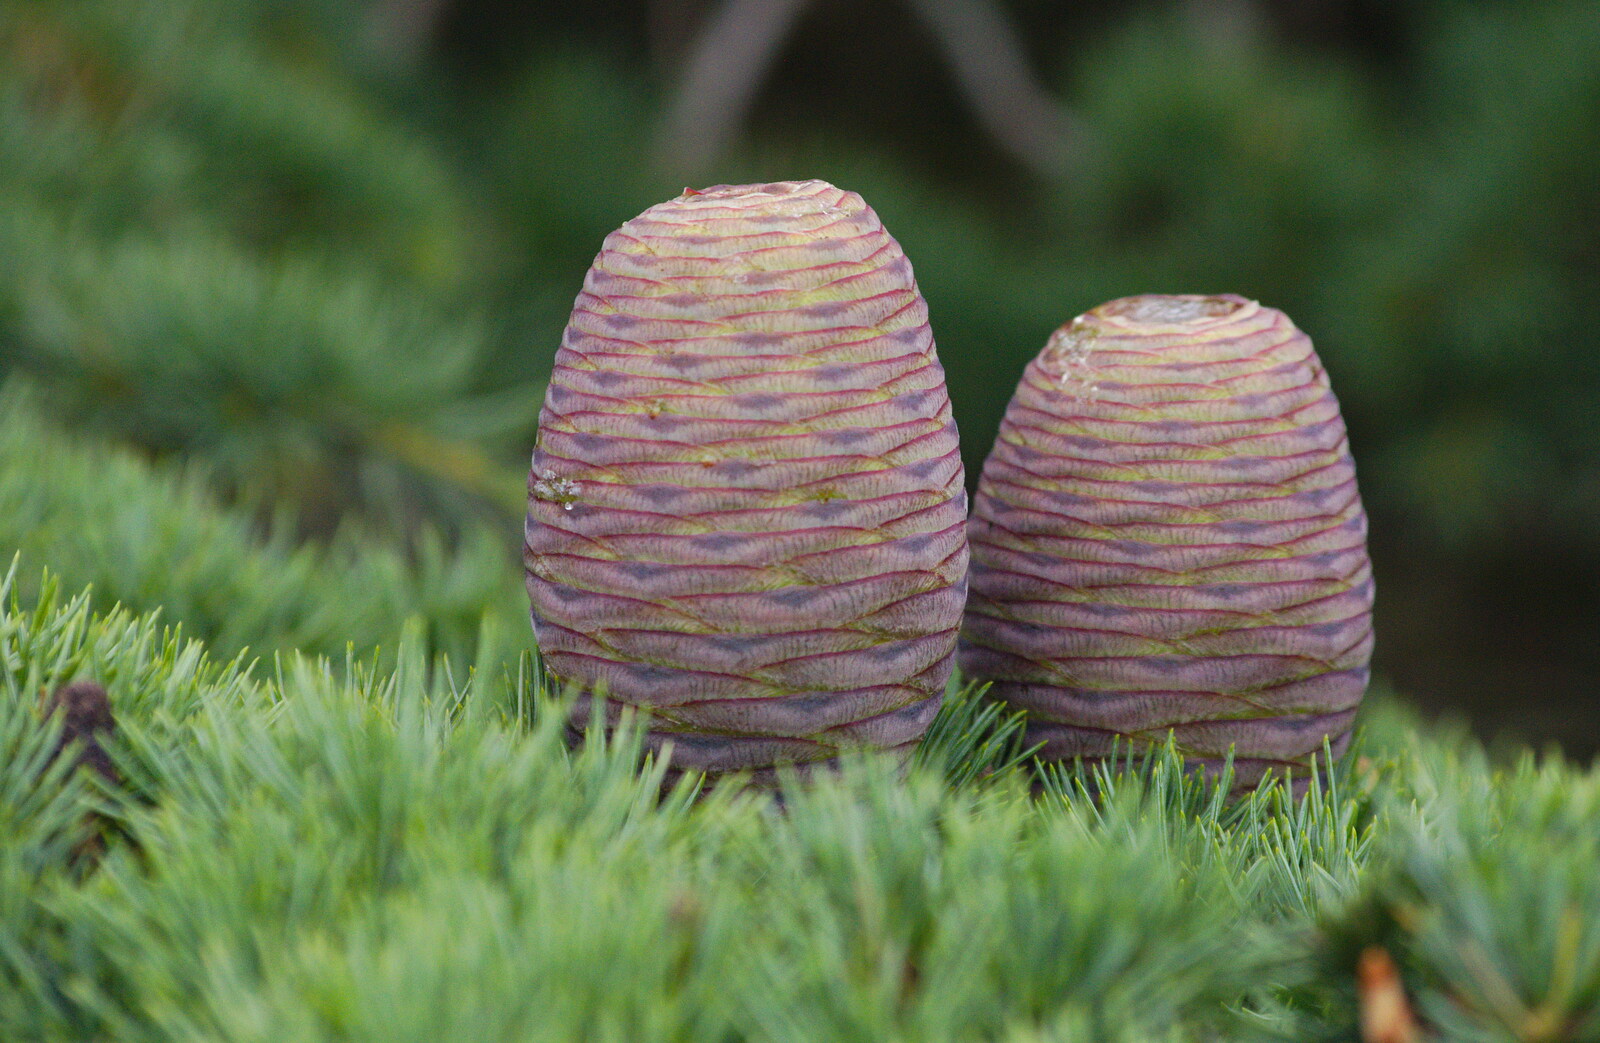 interesting unripe pine cones from Isobel's Race For Life, Chantry Park, Ipswich - 11th June 2014